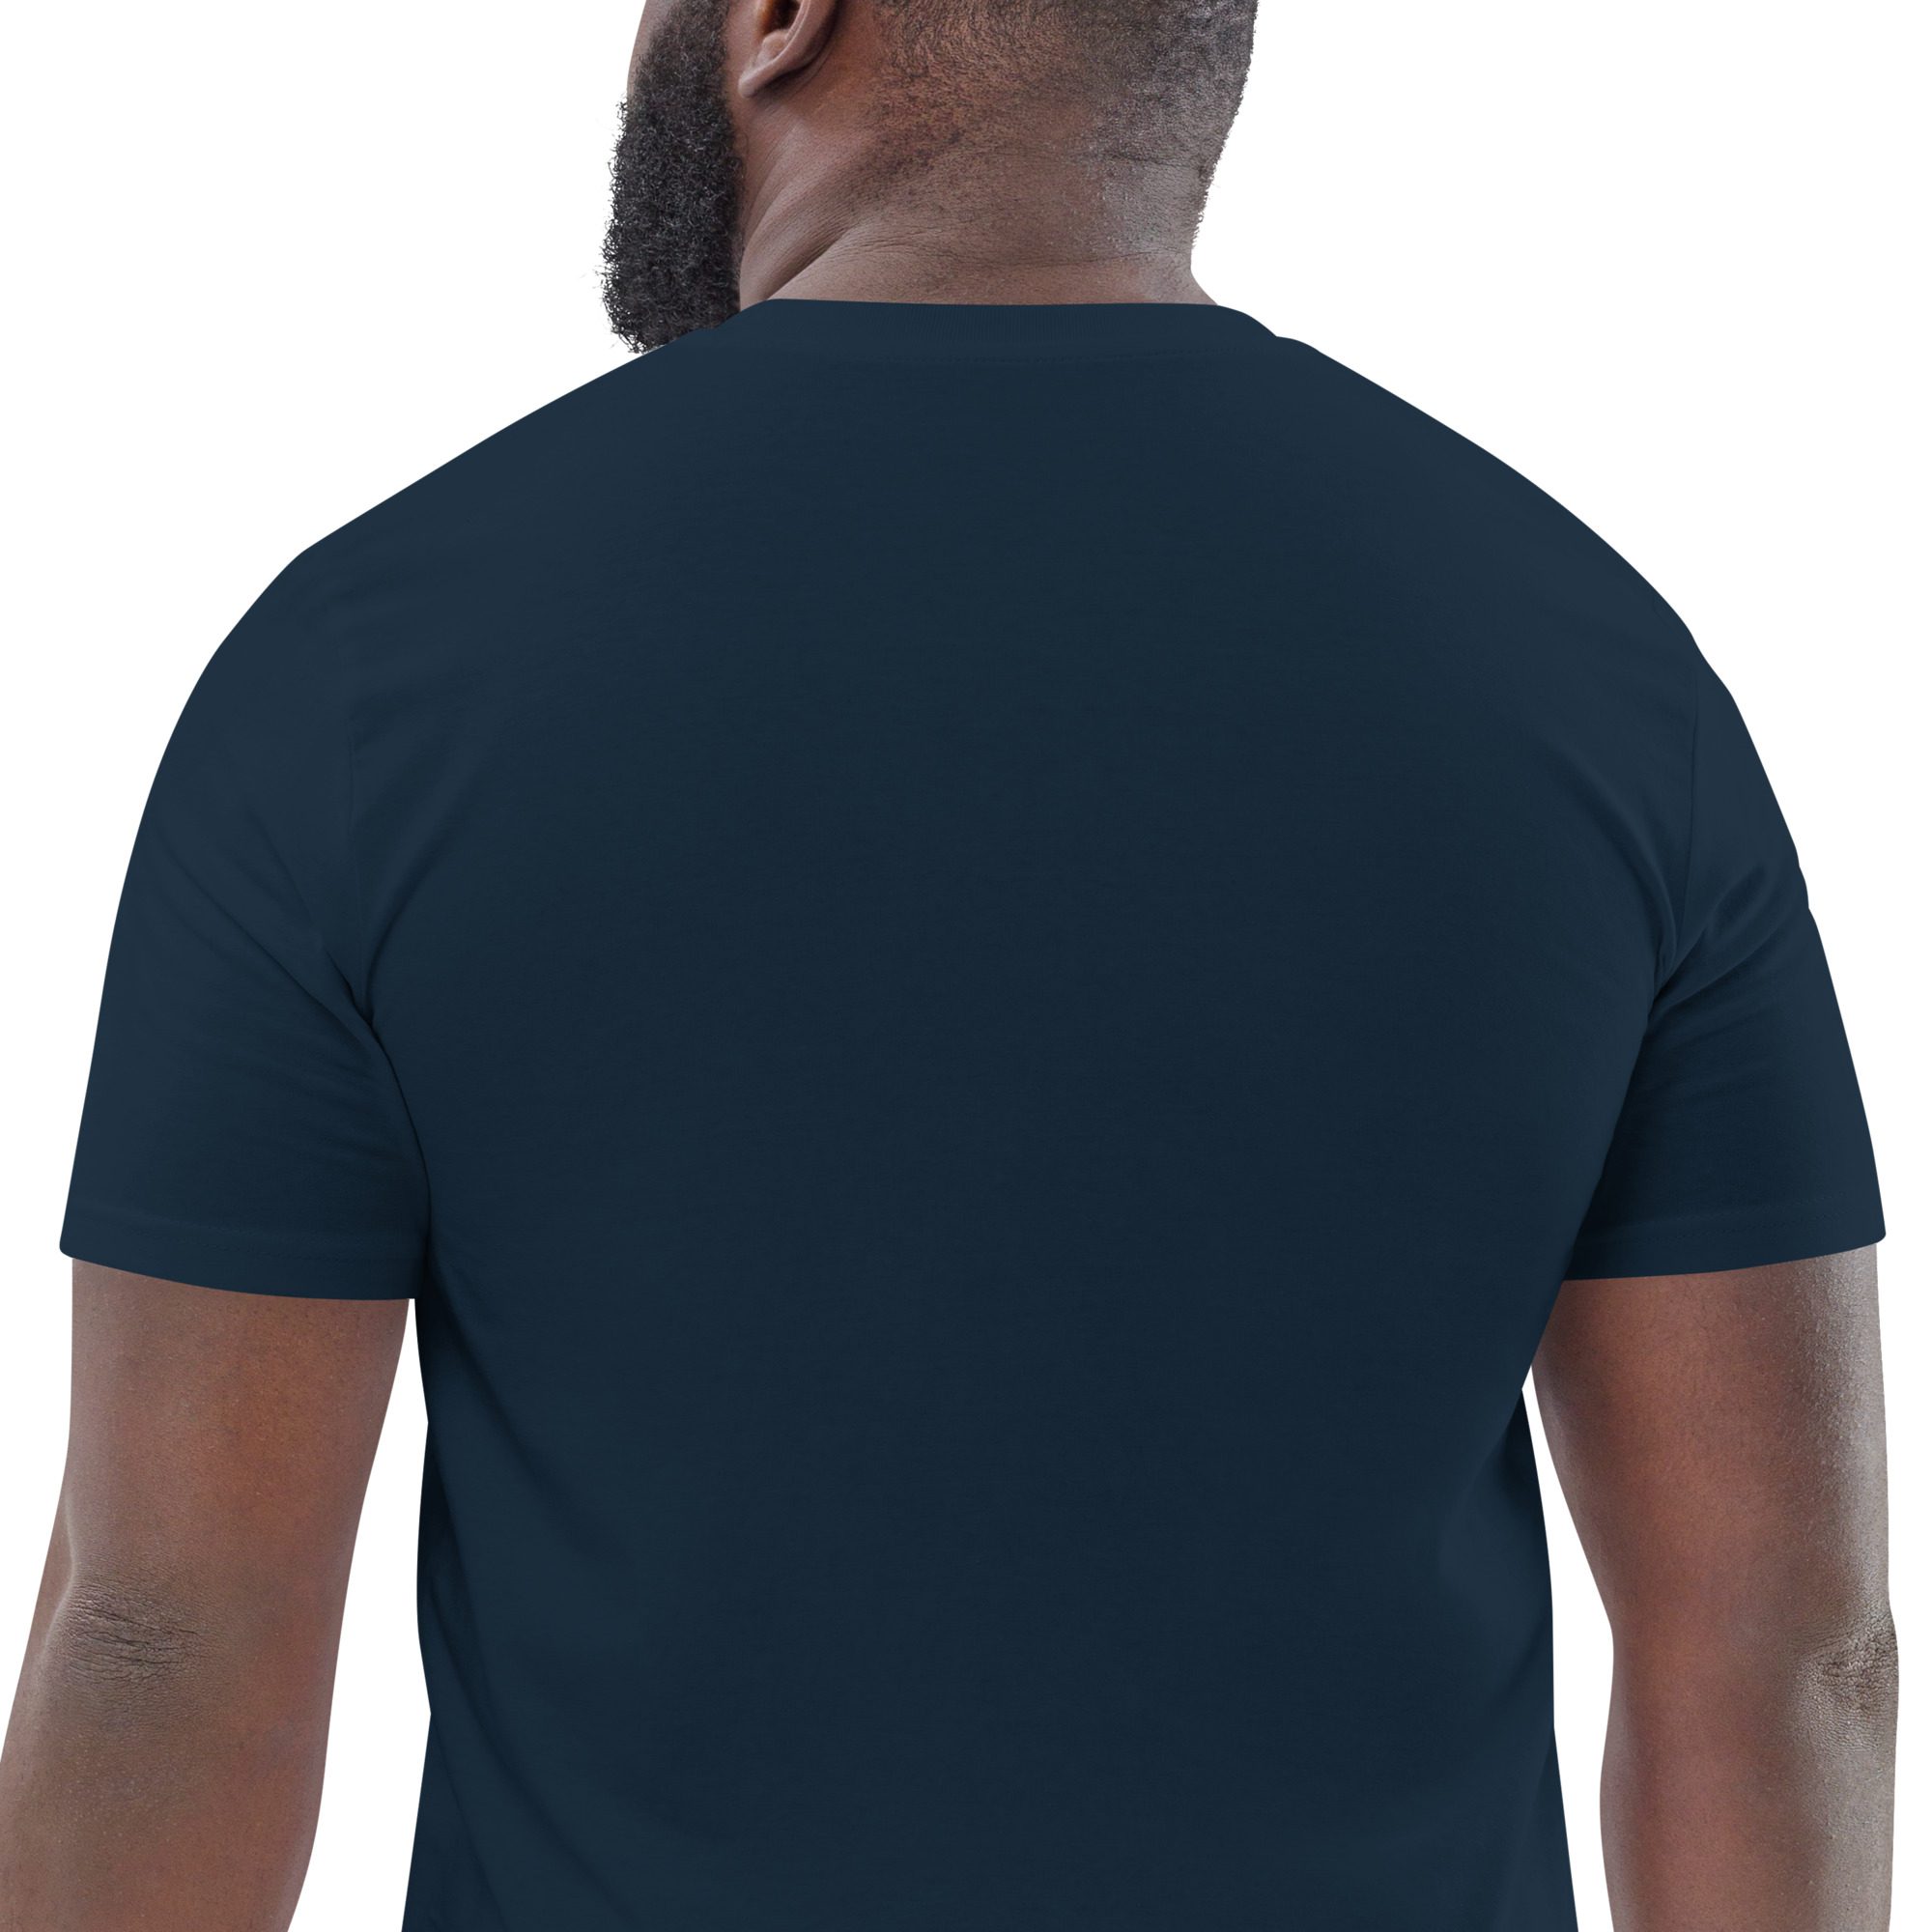 unisex organic cotton t shirt french navy zoomed in 651ada9389c47